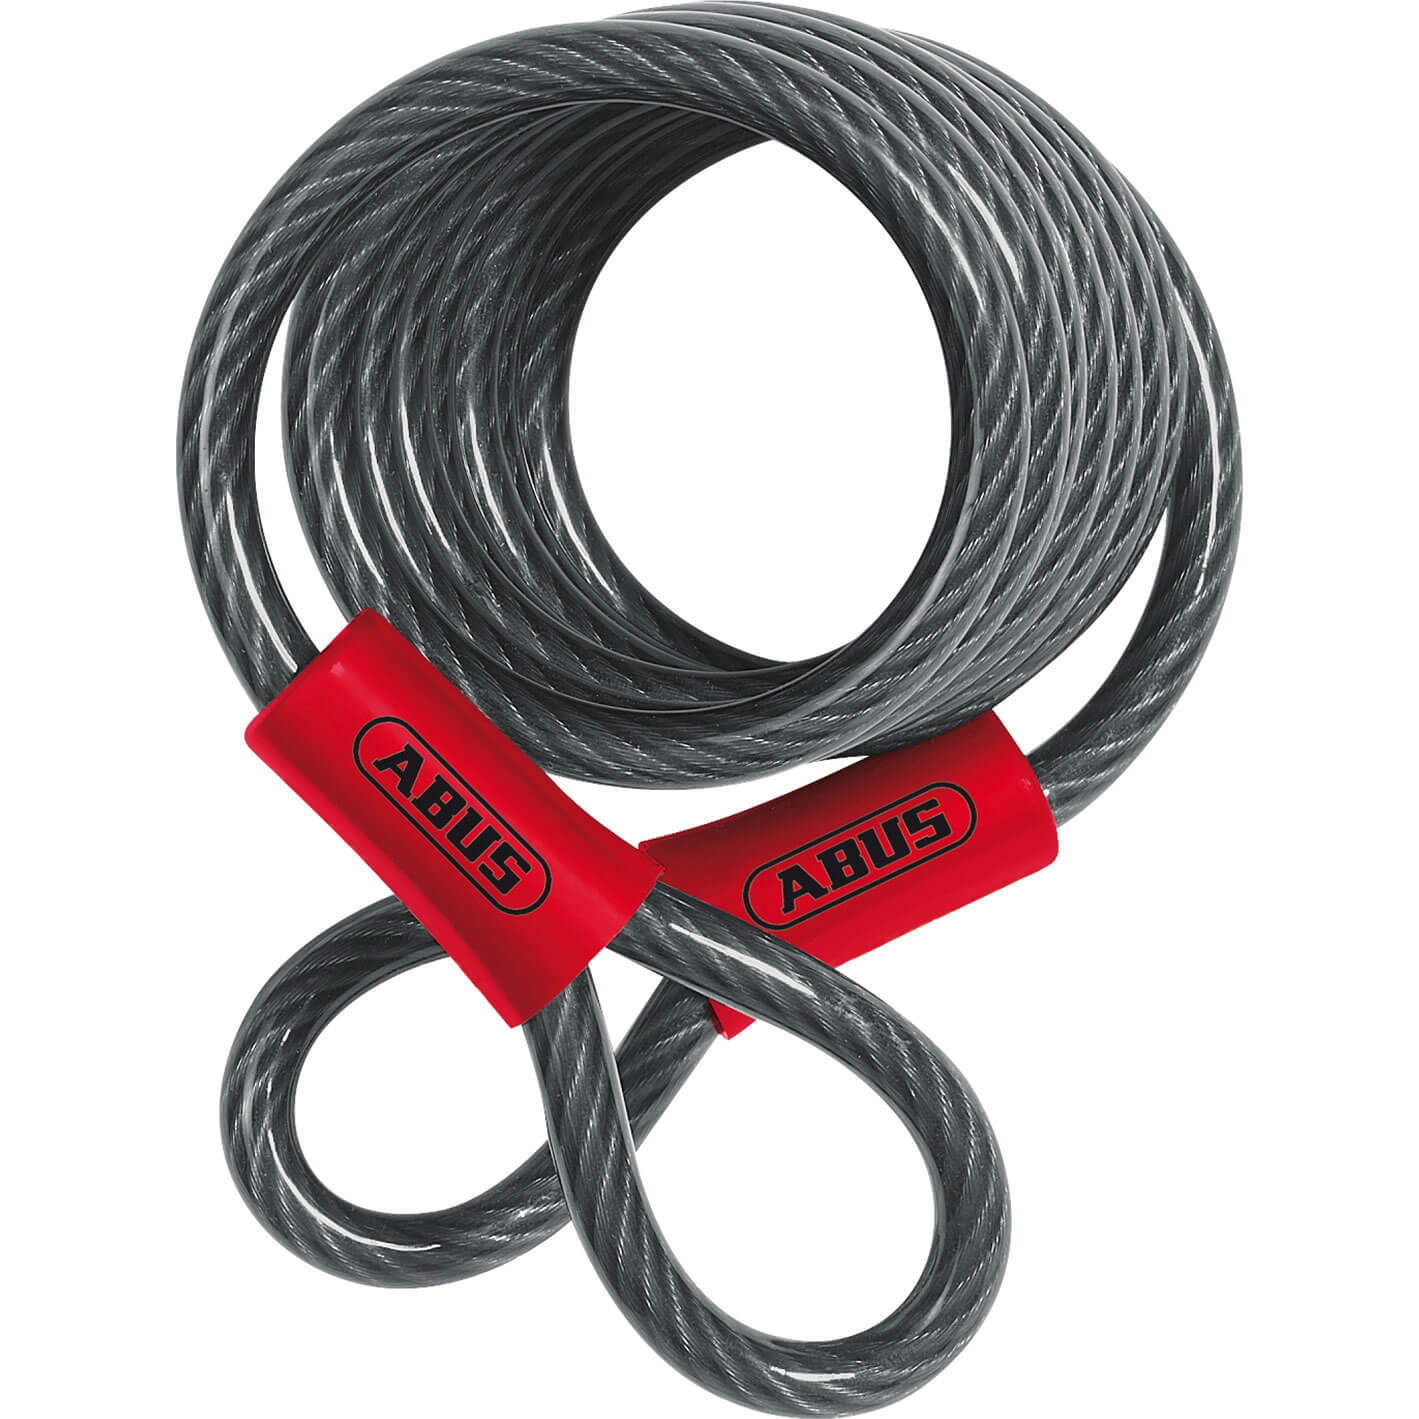 Image of Abus Cobra Security Cable 8mm 1.85m